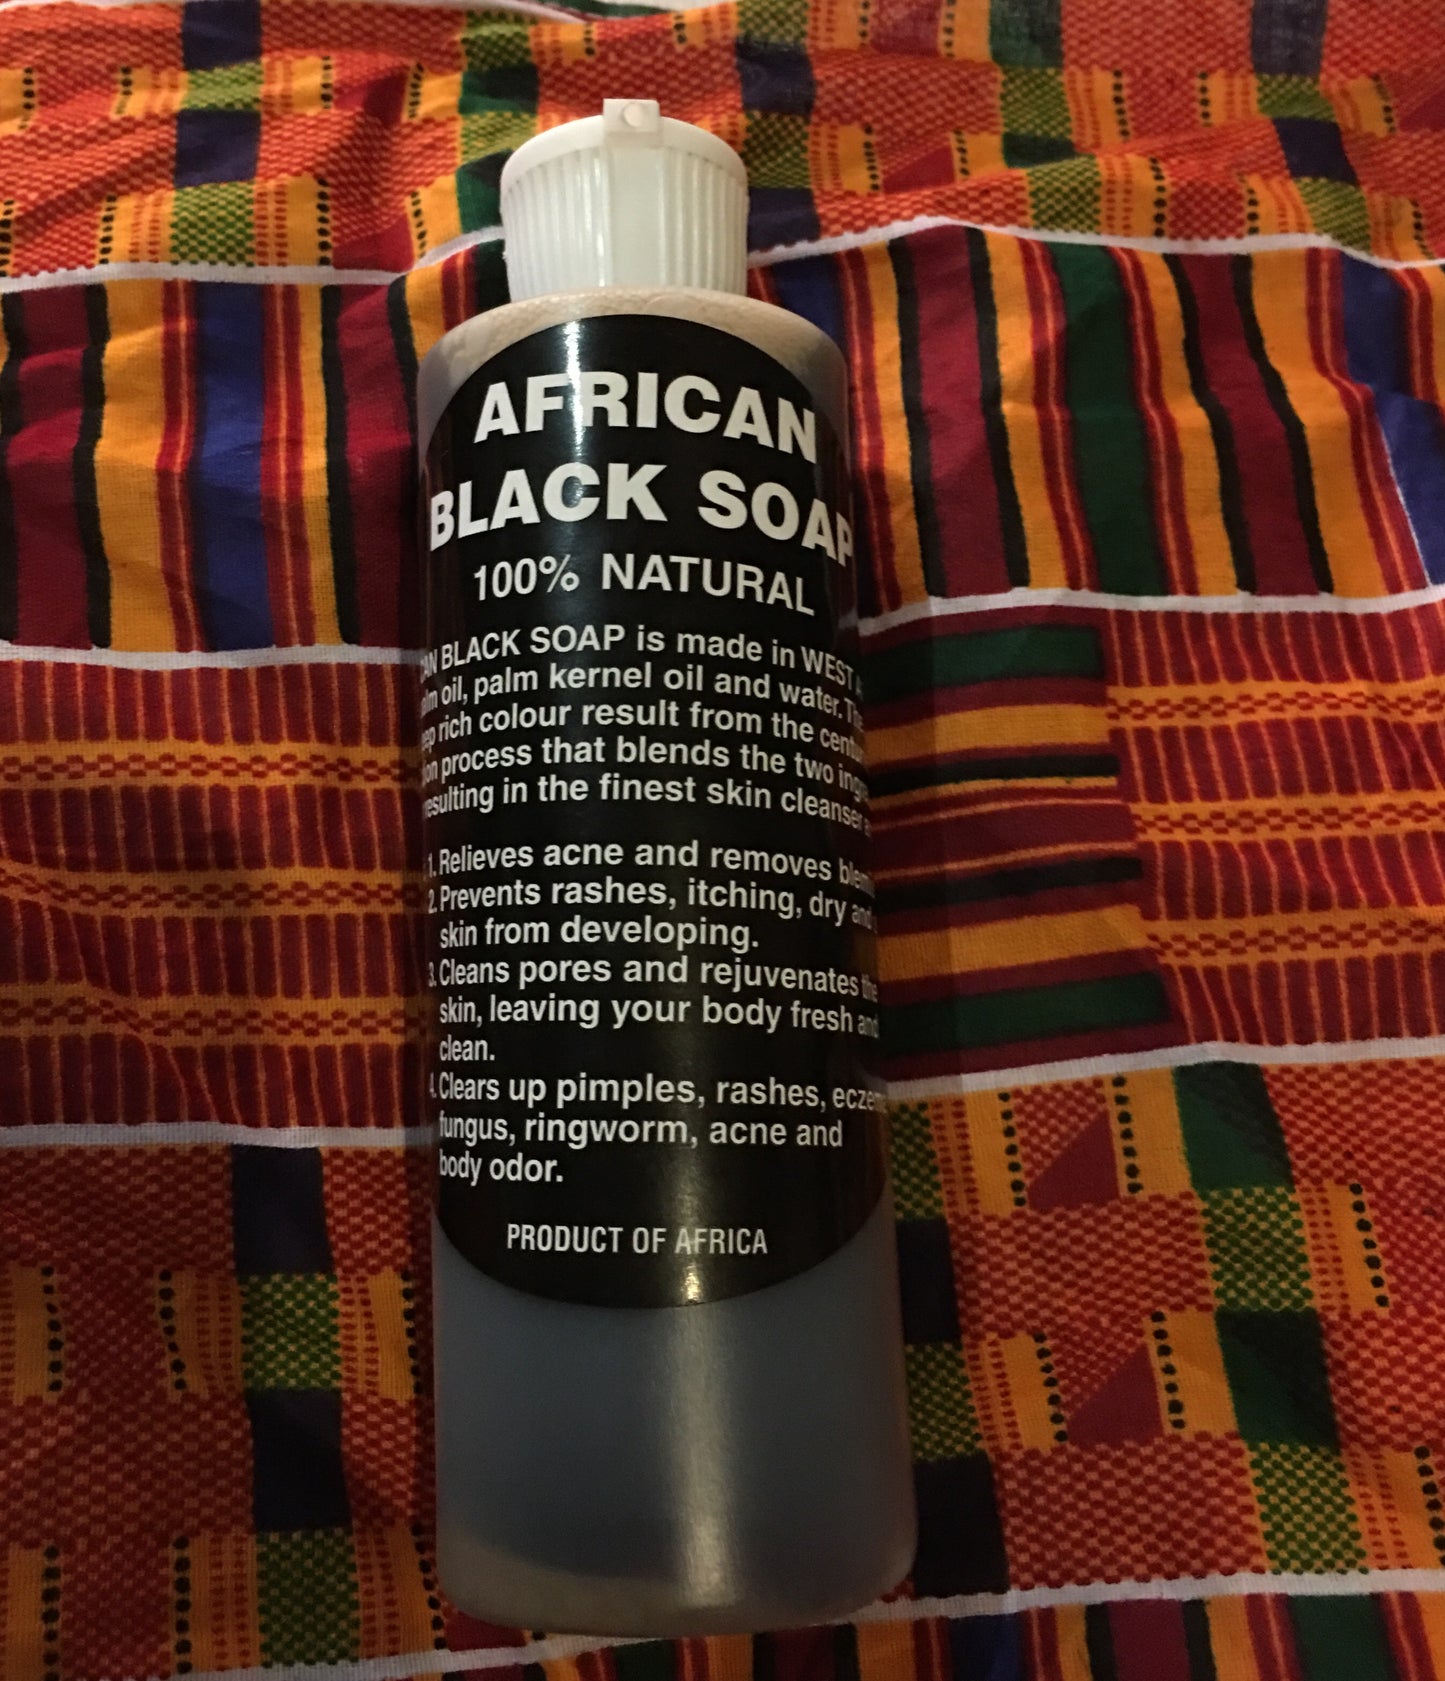 African Raw Black Soap bar and African liquid black soap